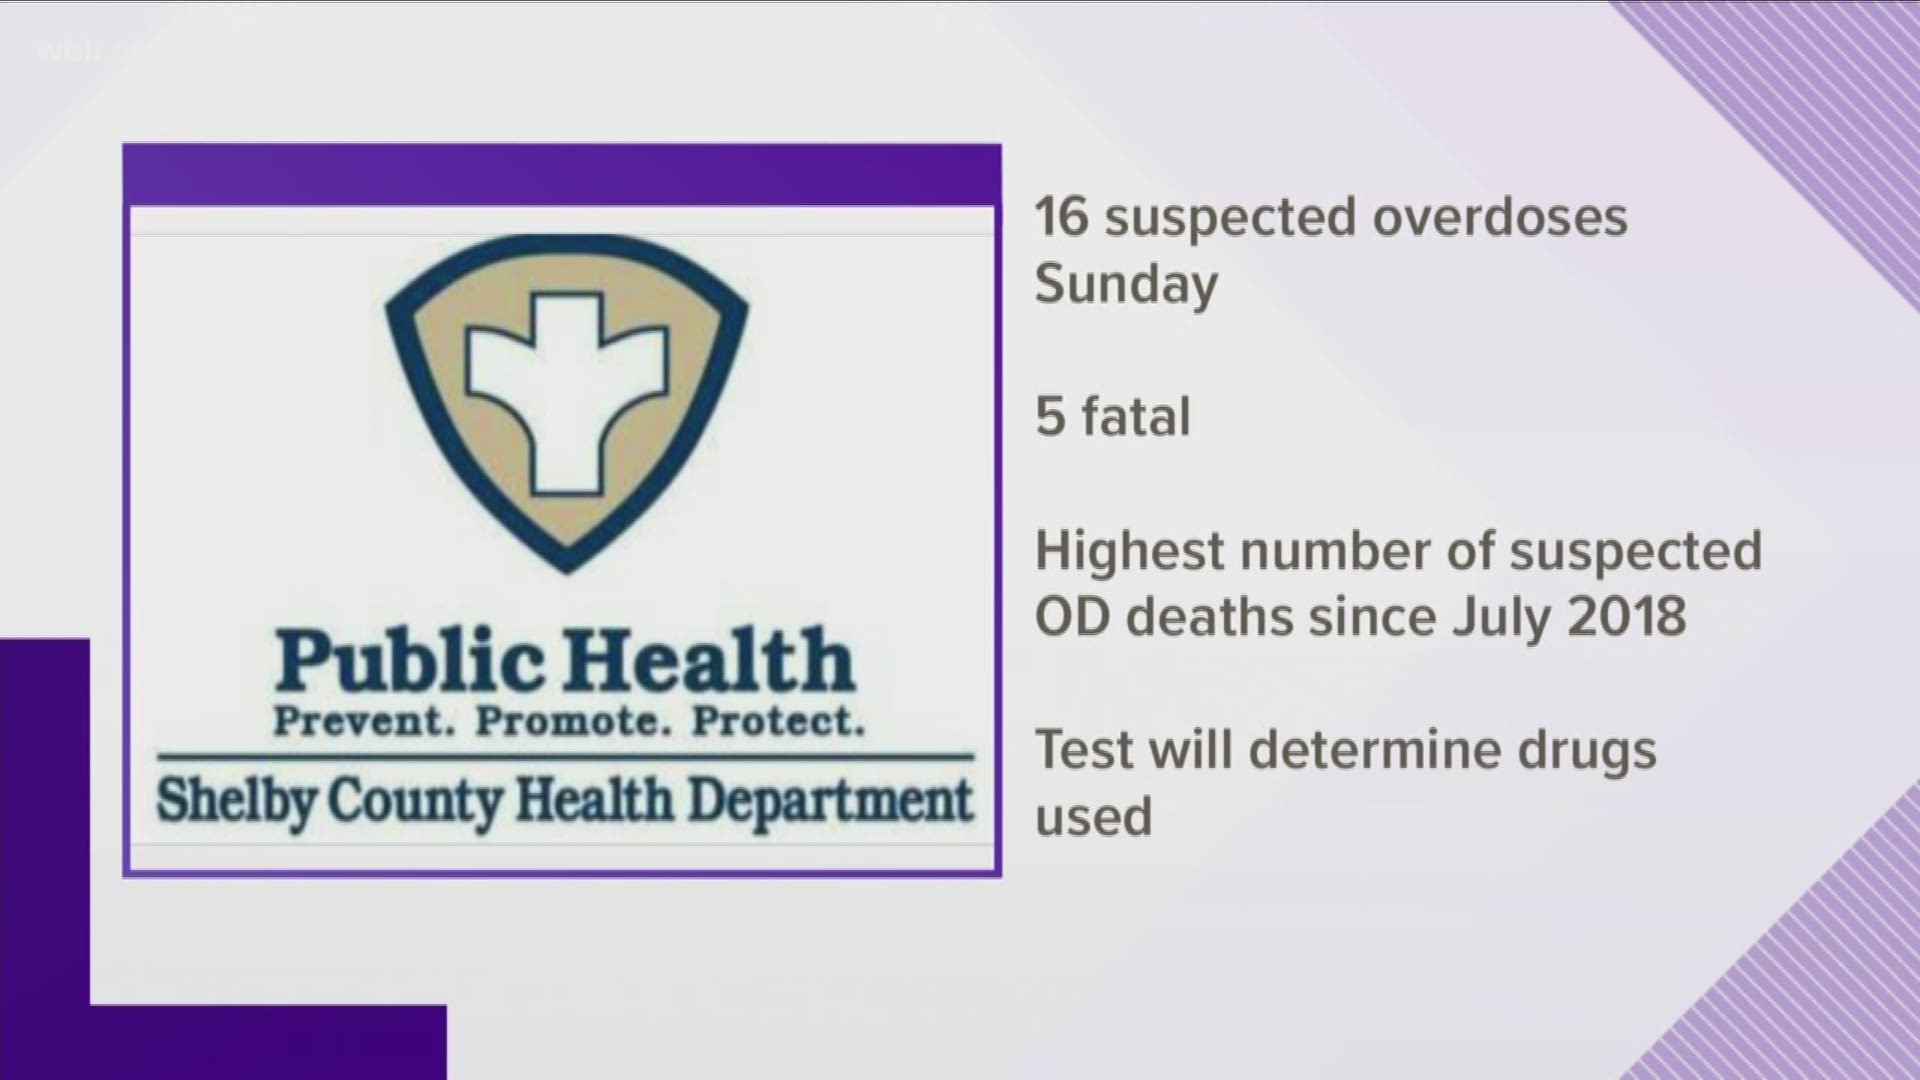 Health leaders in Shelby County say a record number people died of a suspected overdoses in a period lasting 24-hours.